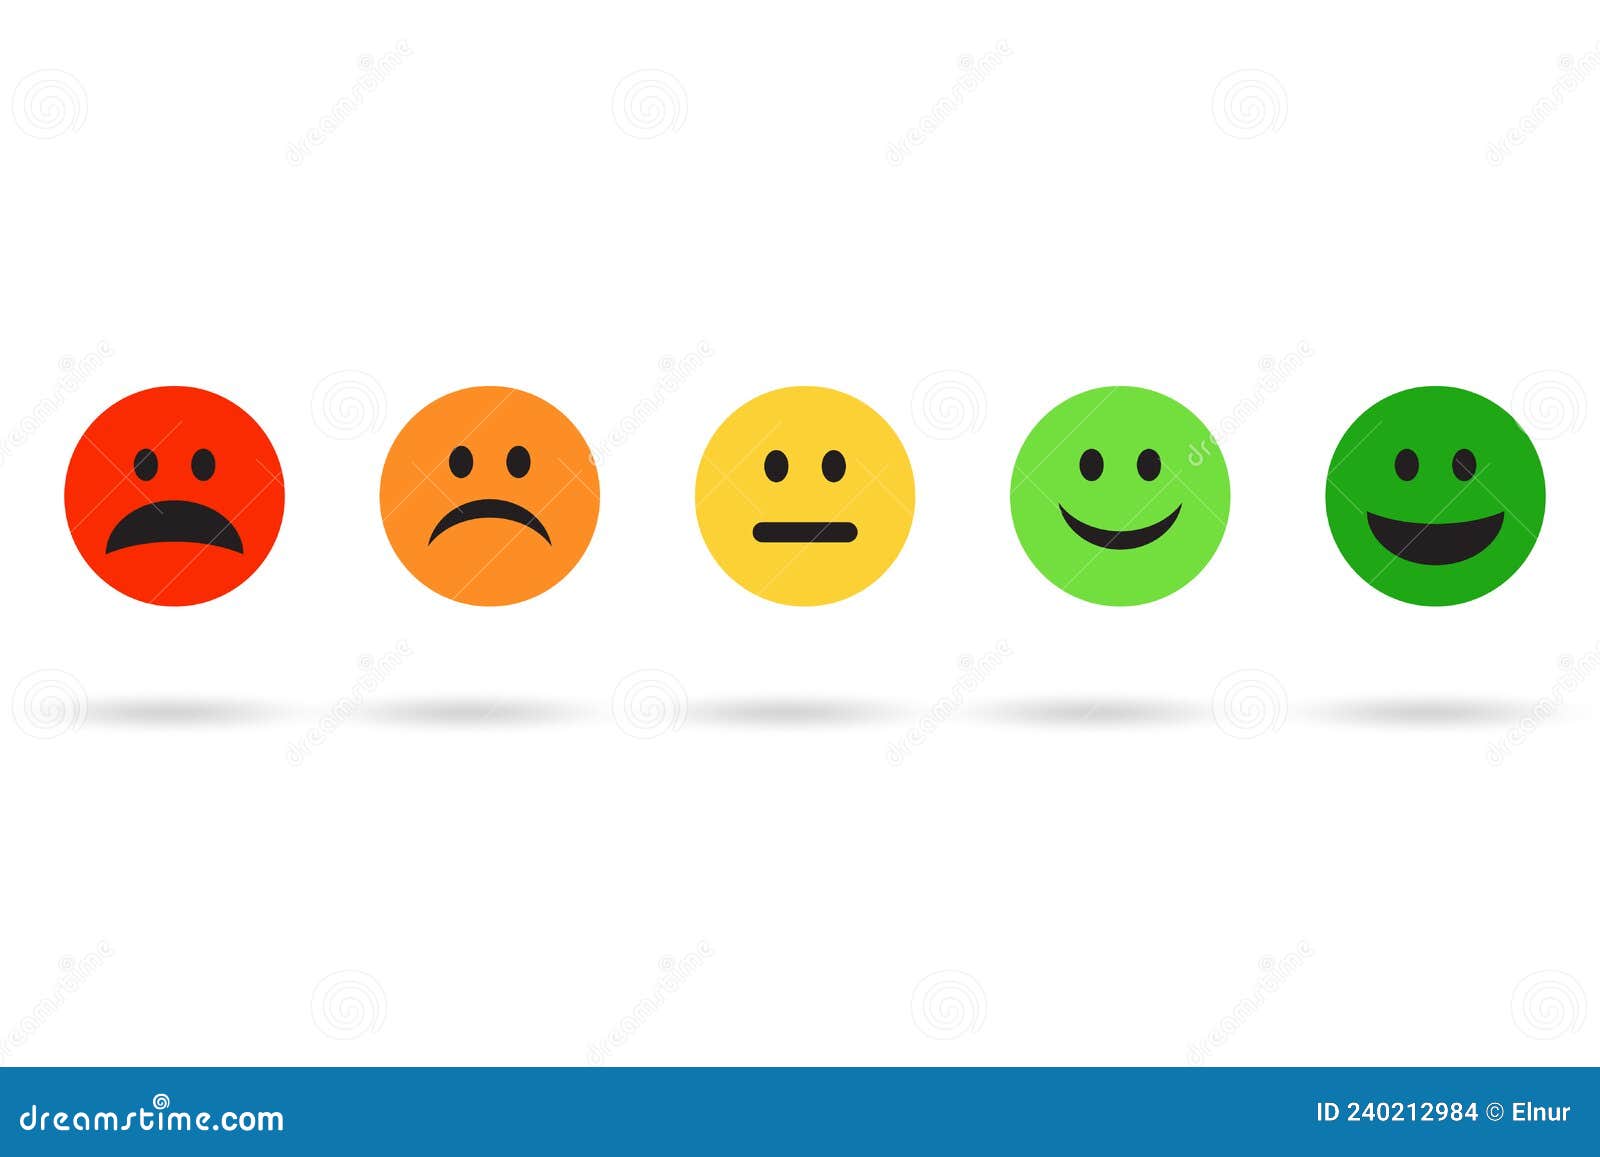 Illustration of Customer Feedback with Faces Stock Illustration ...